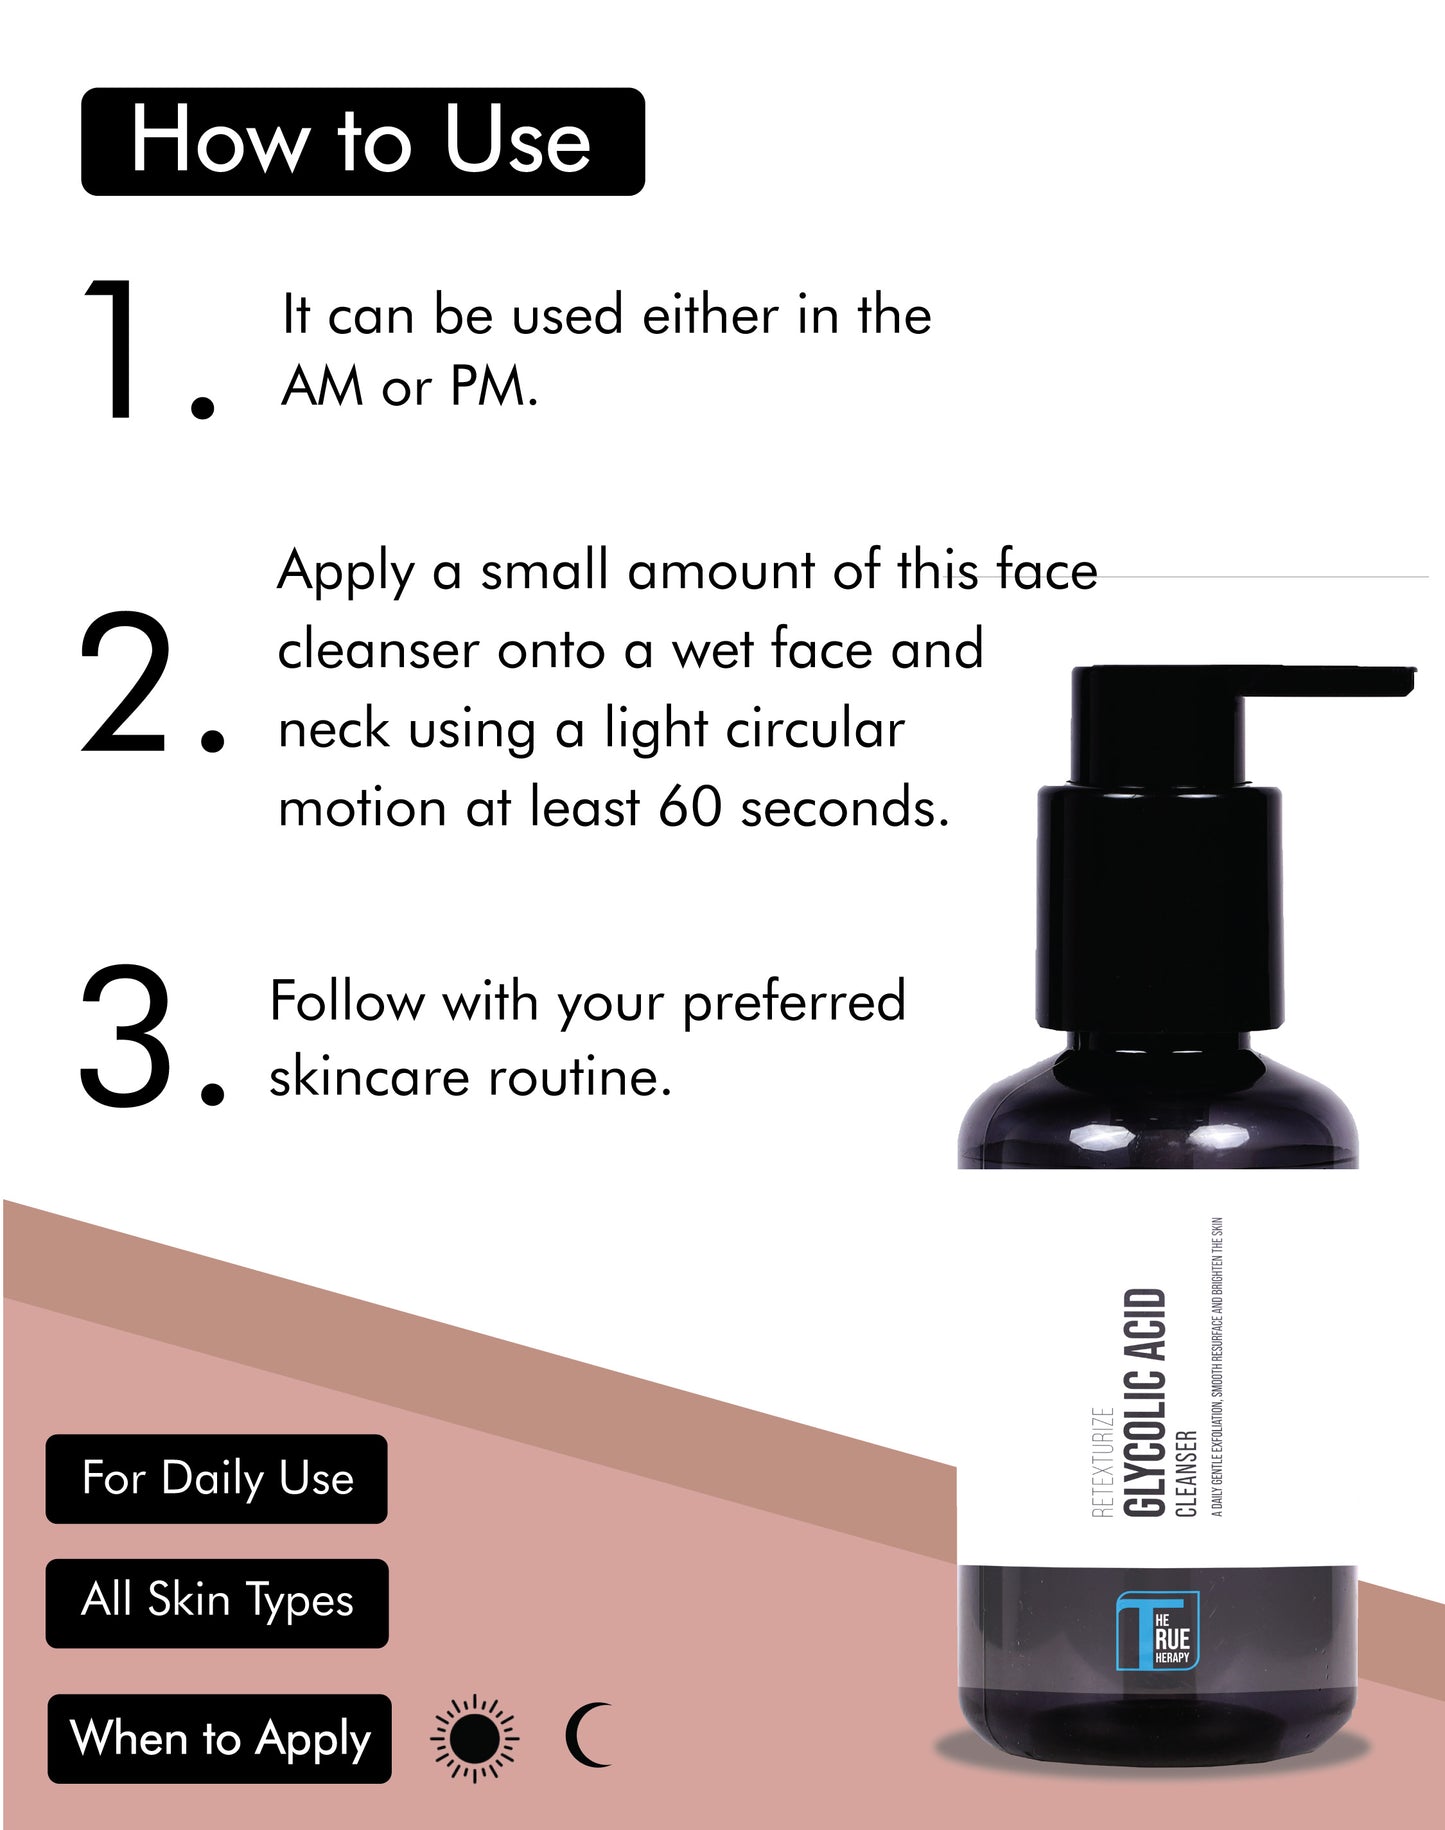 GLYCOLIC ACID CLEANSER - How To Use